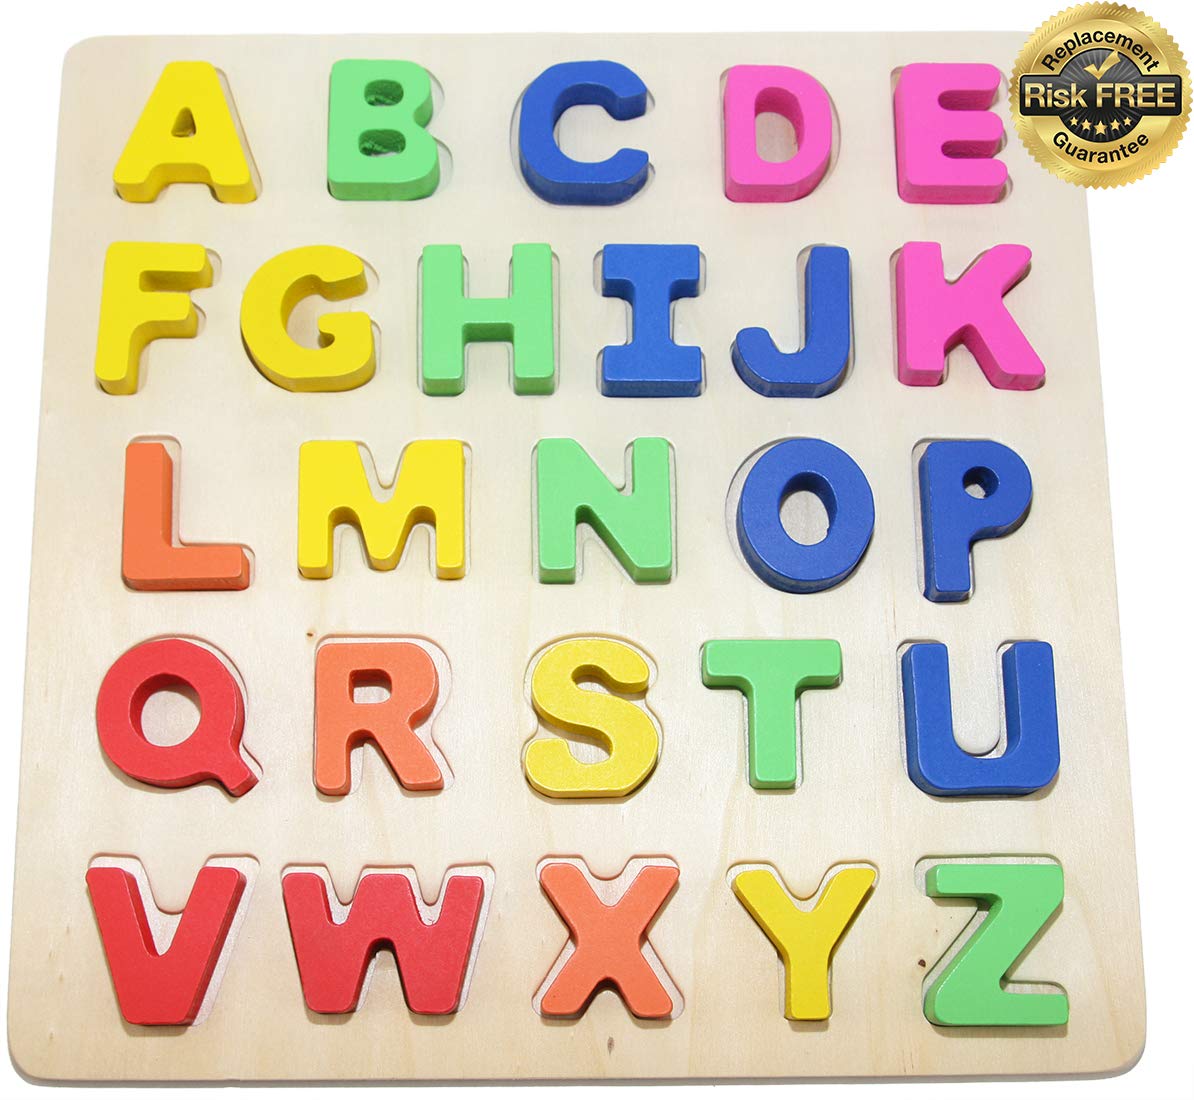 Wooden Alphabet Toddler Puzzles Toys For 2 To 3 Year Olds Kids With Big Bright Color Letters